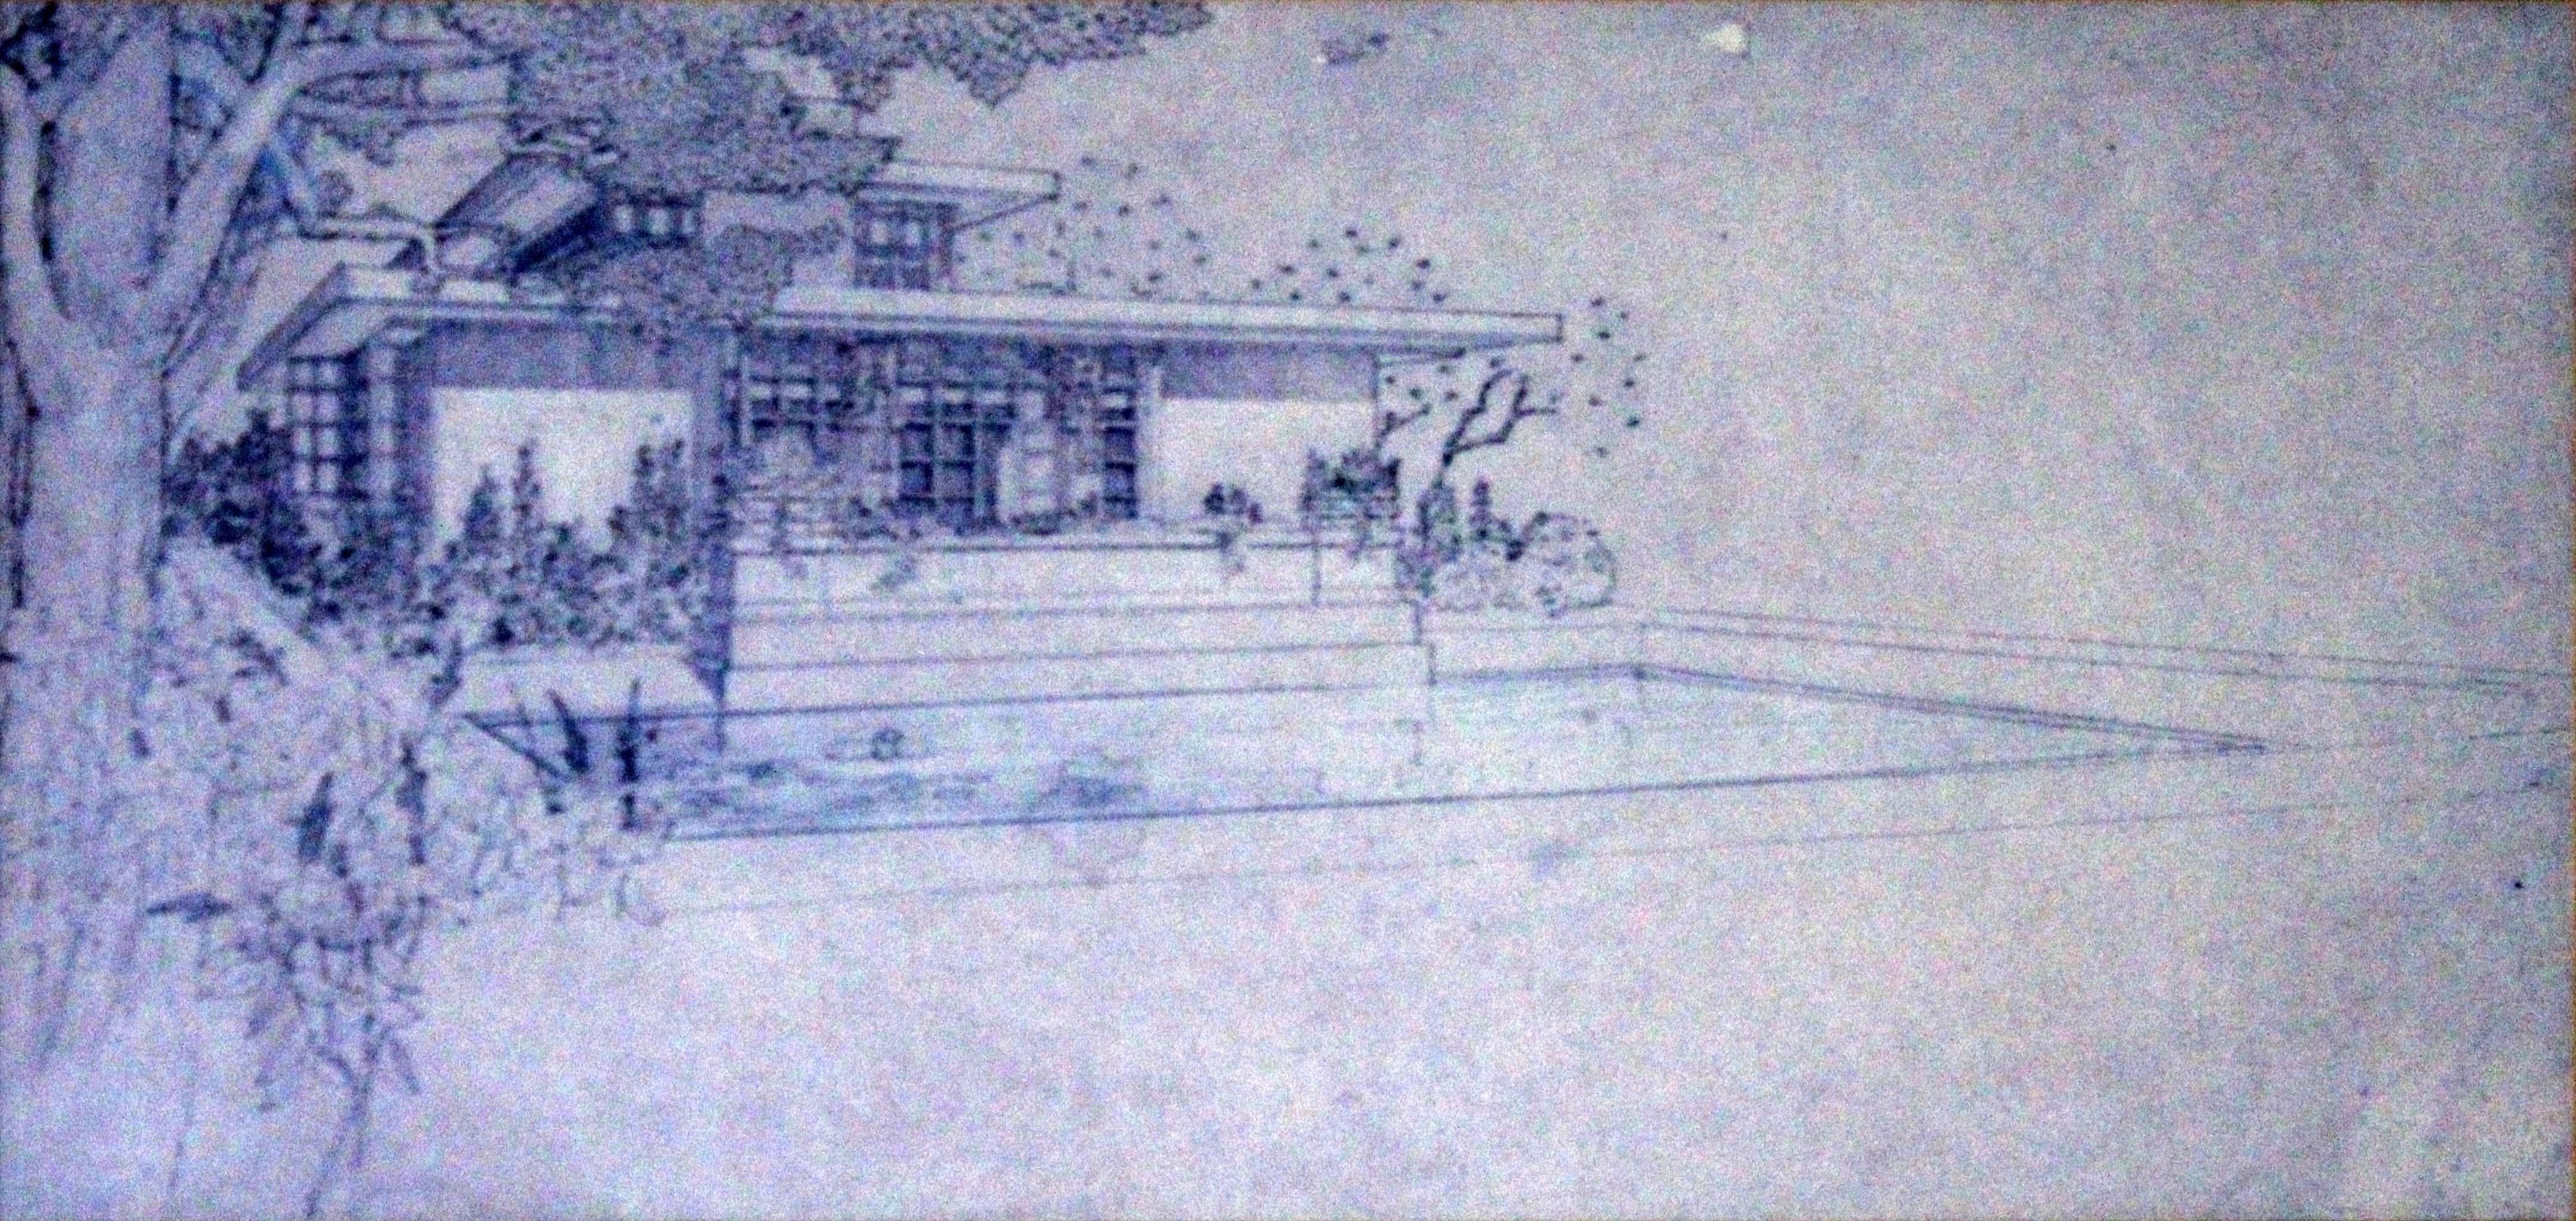 A unique collector’s item for architects, designers, or fans of Frank Lloyd Wright – an architectural drawing depicting the project Richard Bock Studio and Re1715ce, Maywood, Illinois, 1906. Dimensions: 16h x 24.25w (framed). In very good vintage